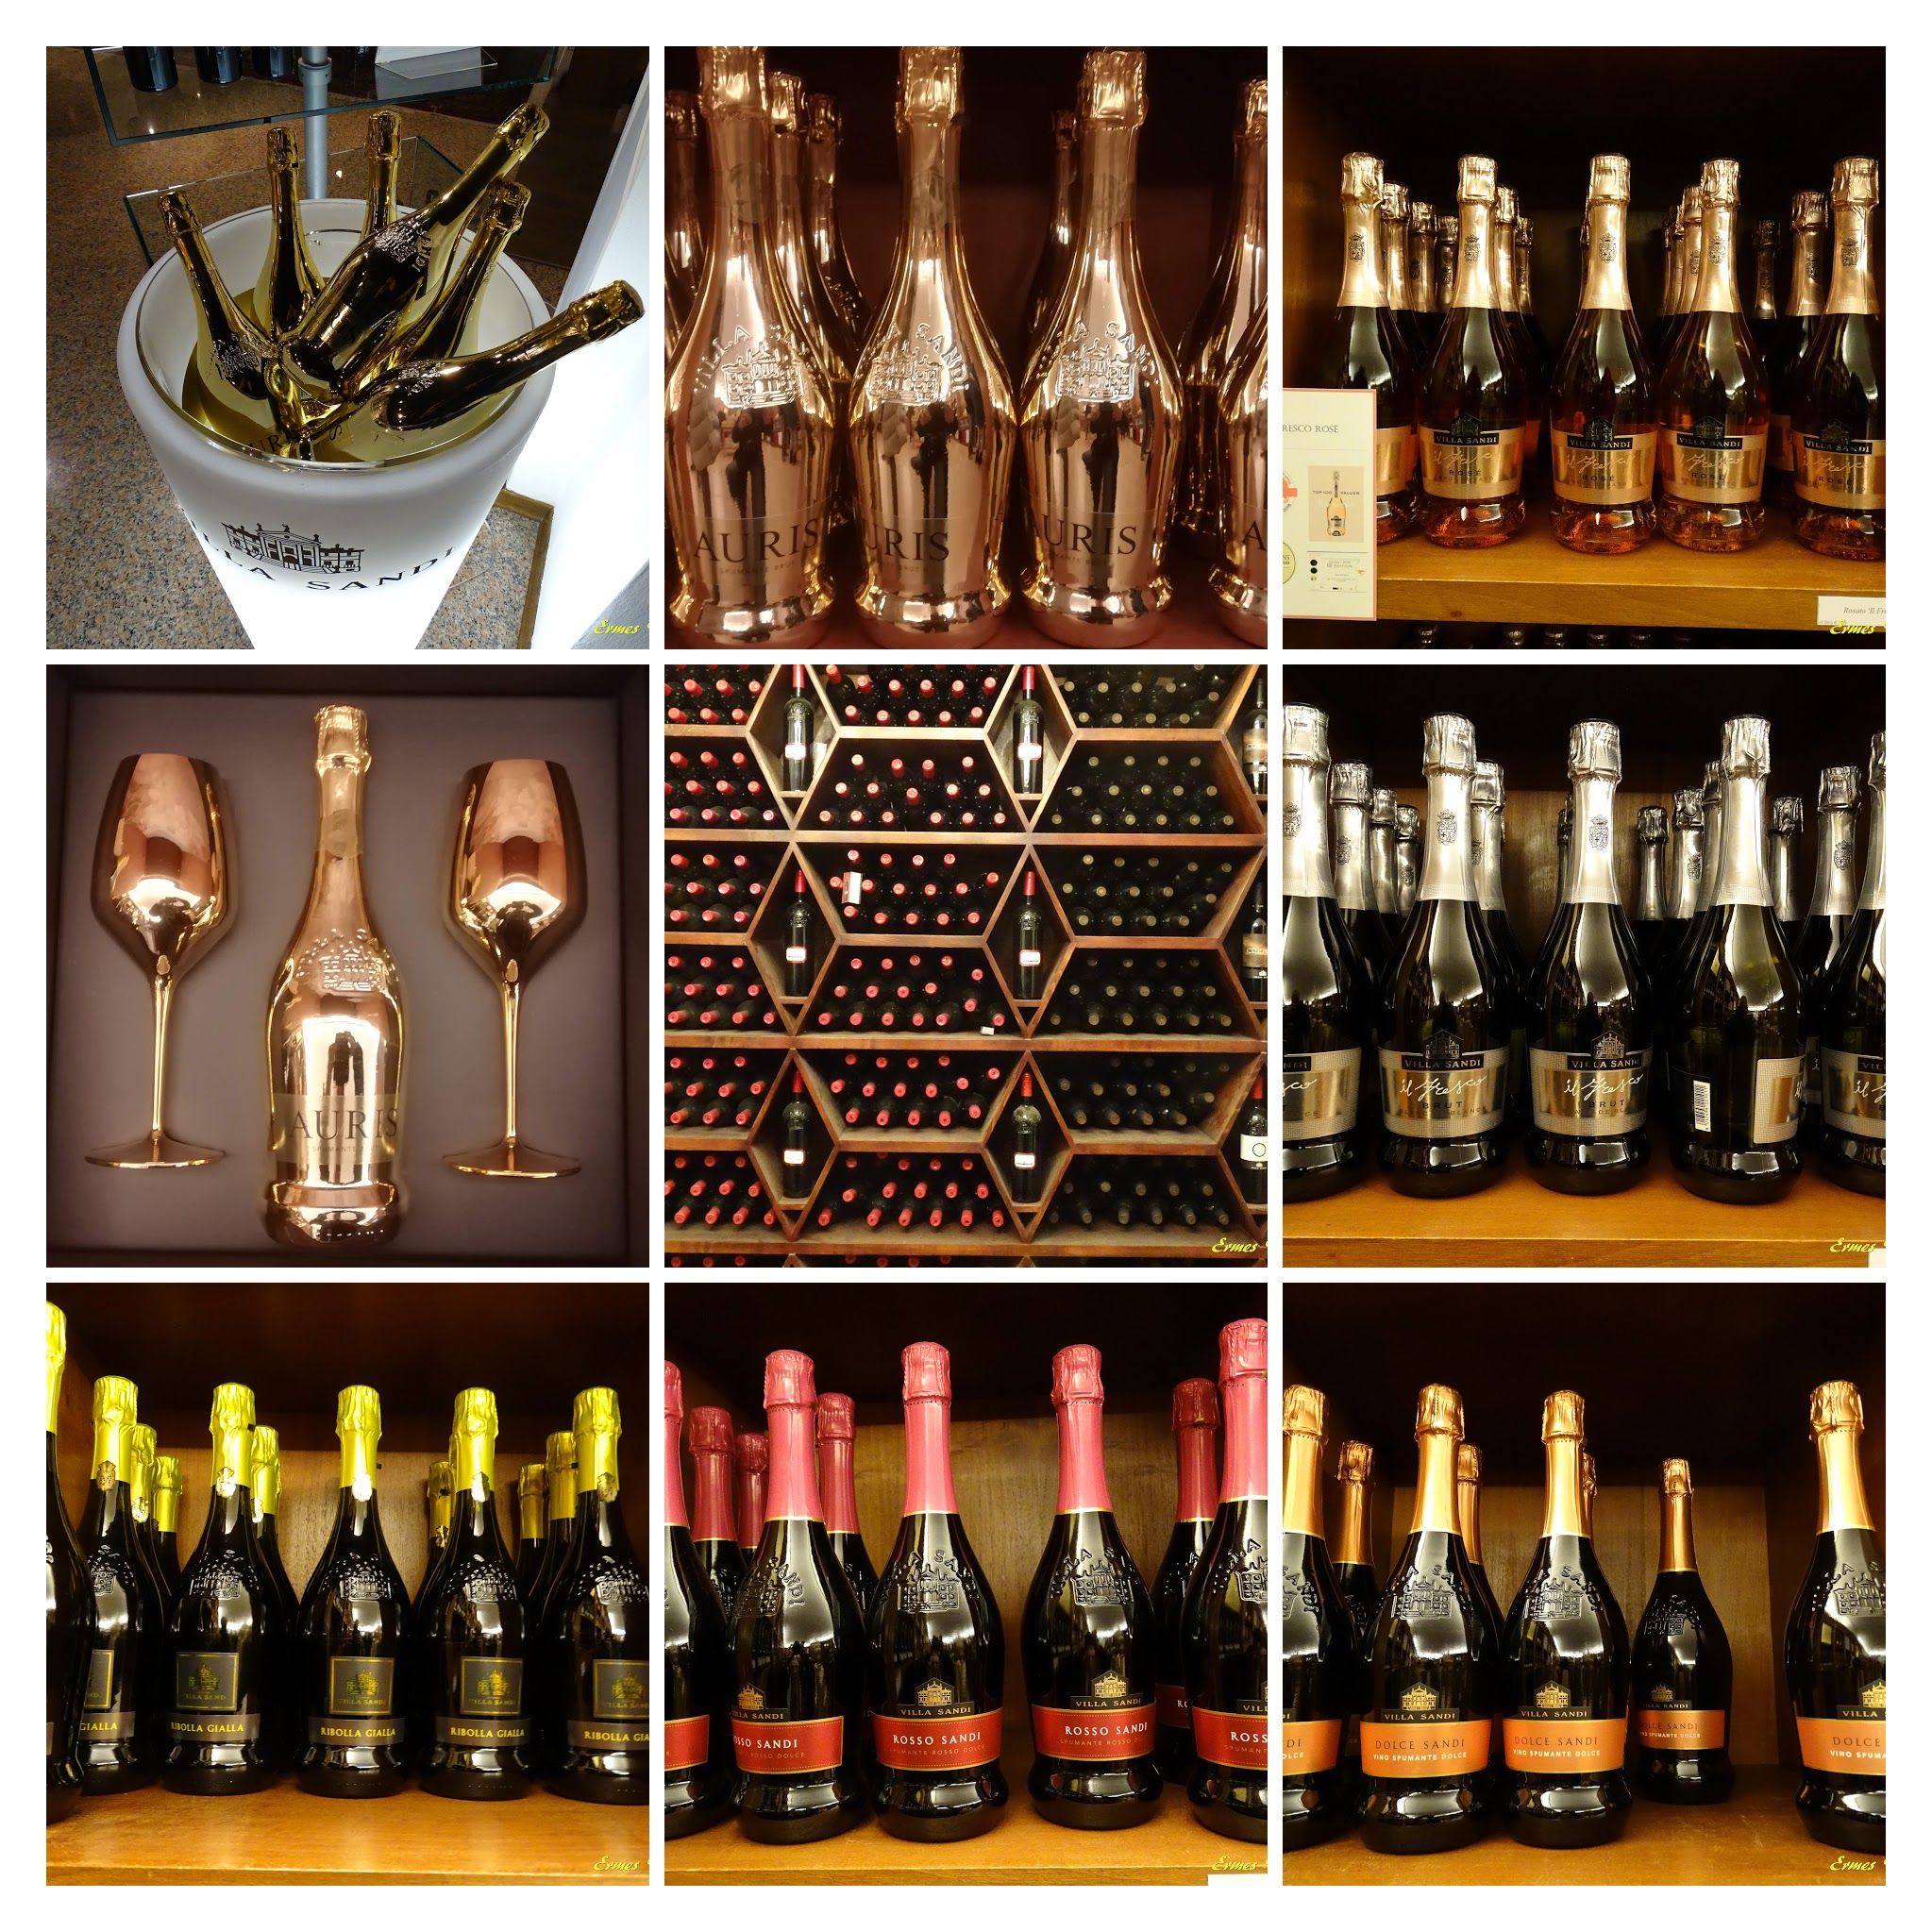 Caption: a lot of different sparkling wines - photo credit: Local Guide @Ermest